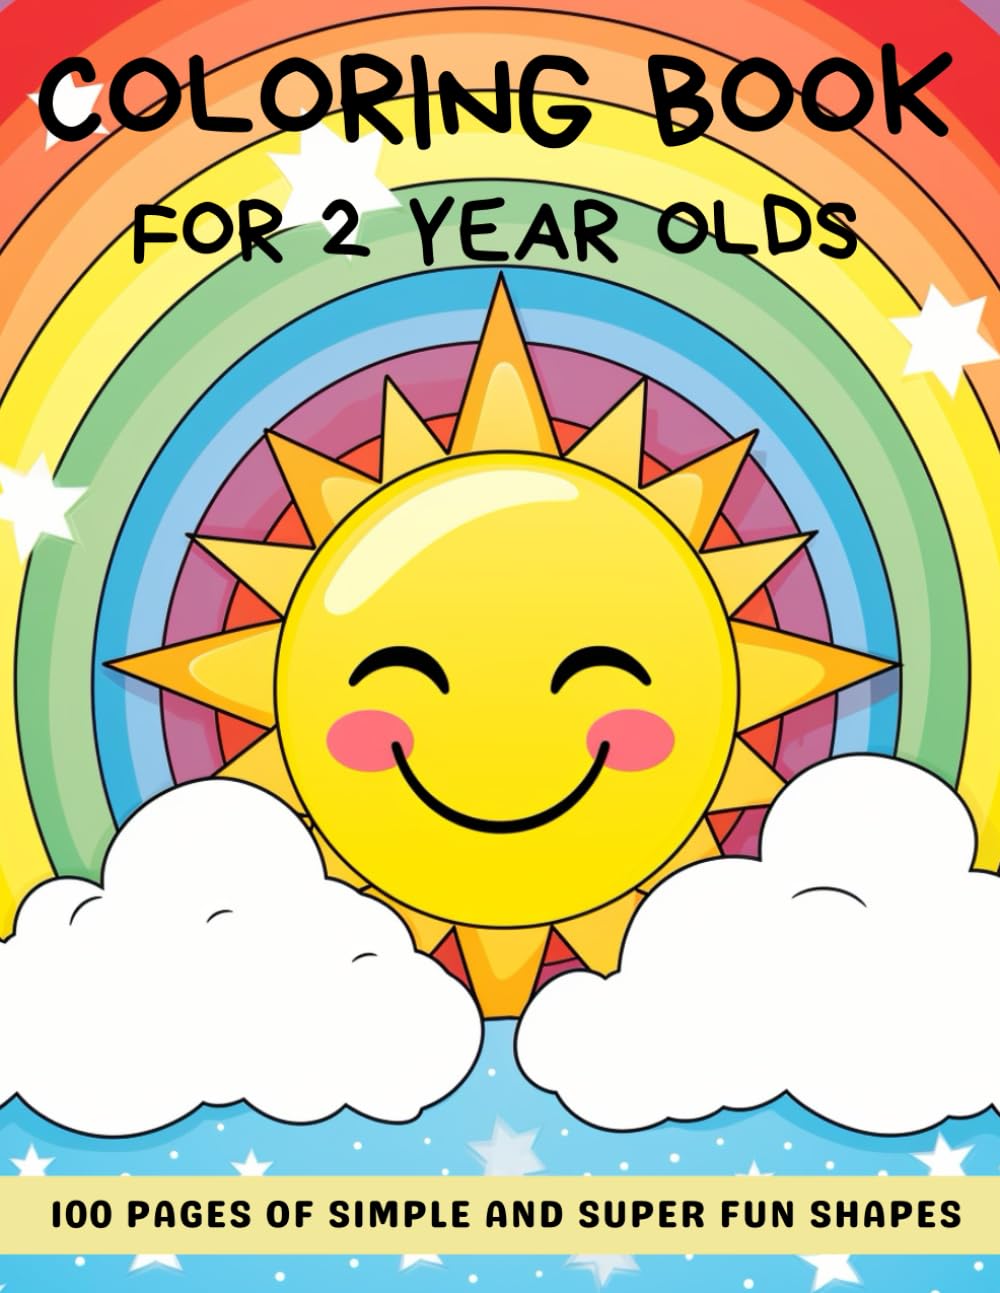 Coloring Book For 2 years old Kids: 100 Super Cute coloring pages for Babies and Toddlers about tiny and happy animals, toys, everyday's objects.